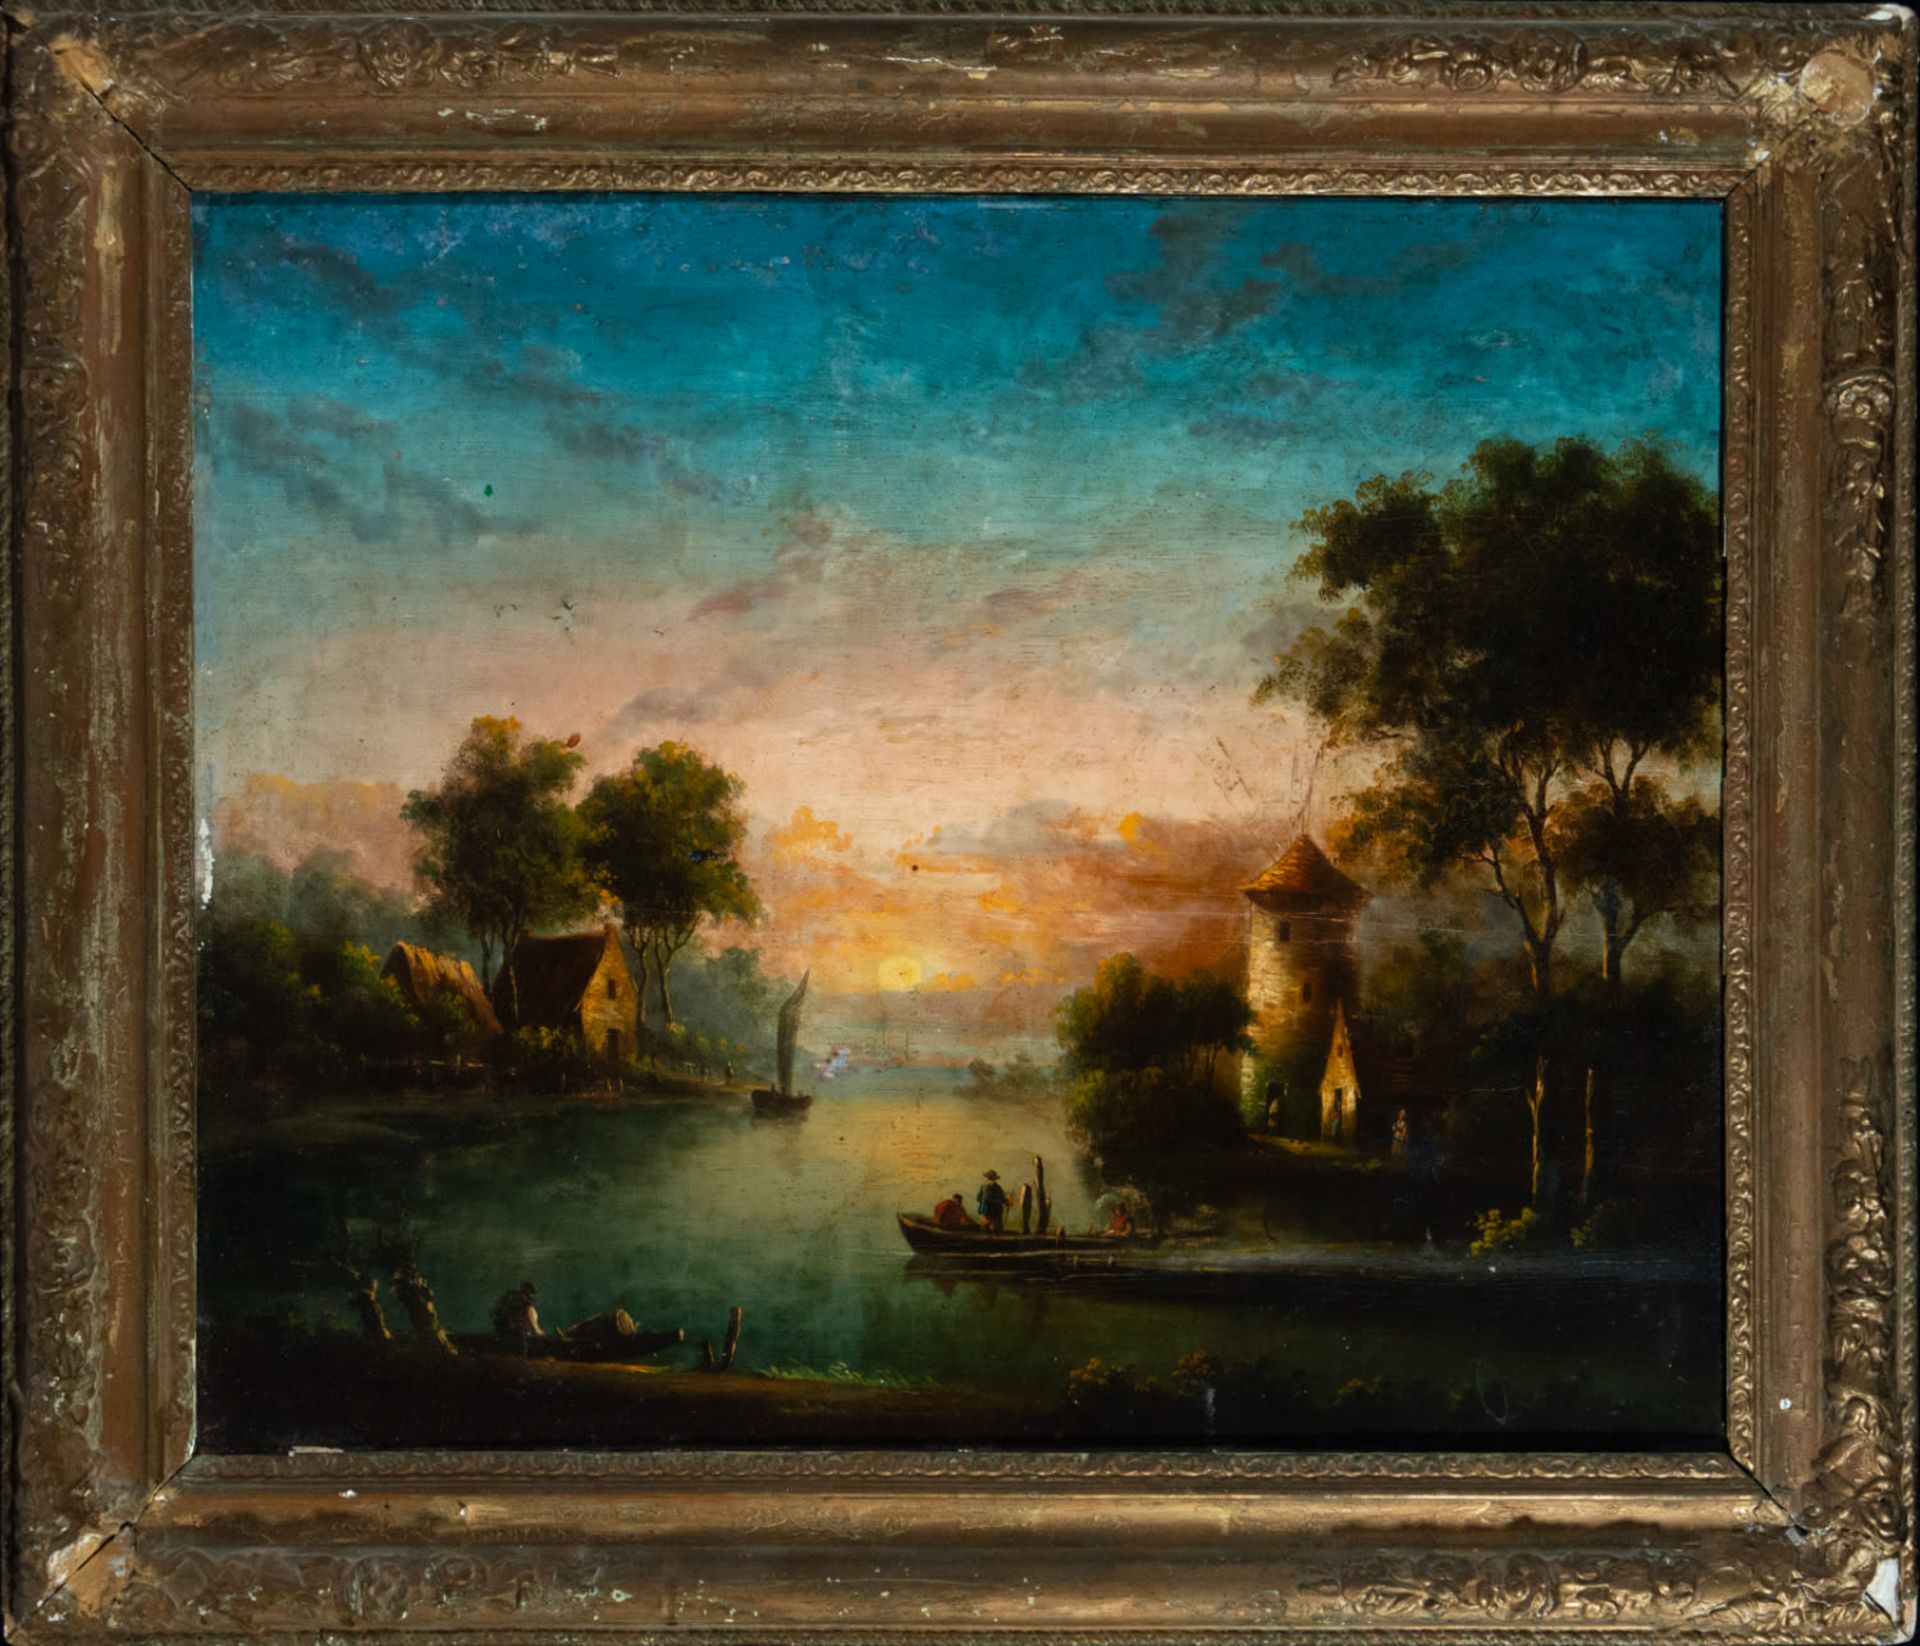 Dutch canal painted in oil on panel, 18th century